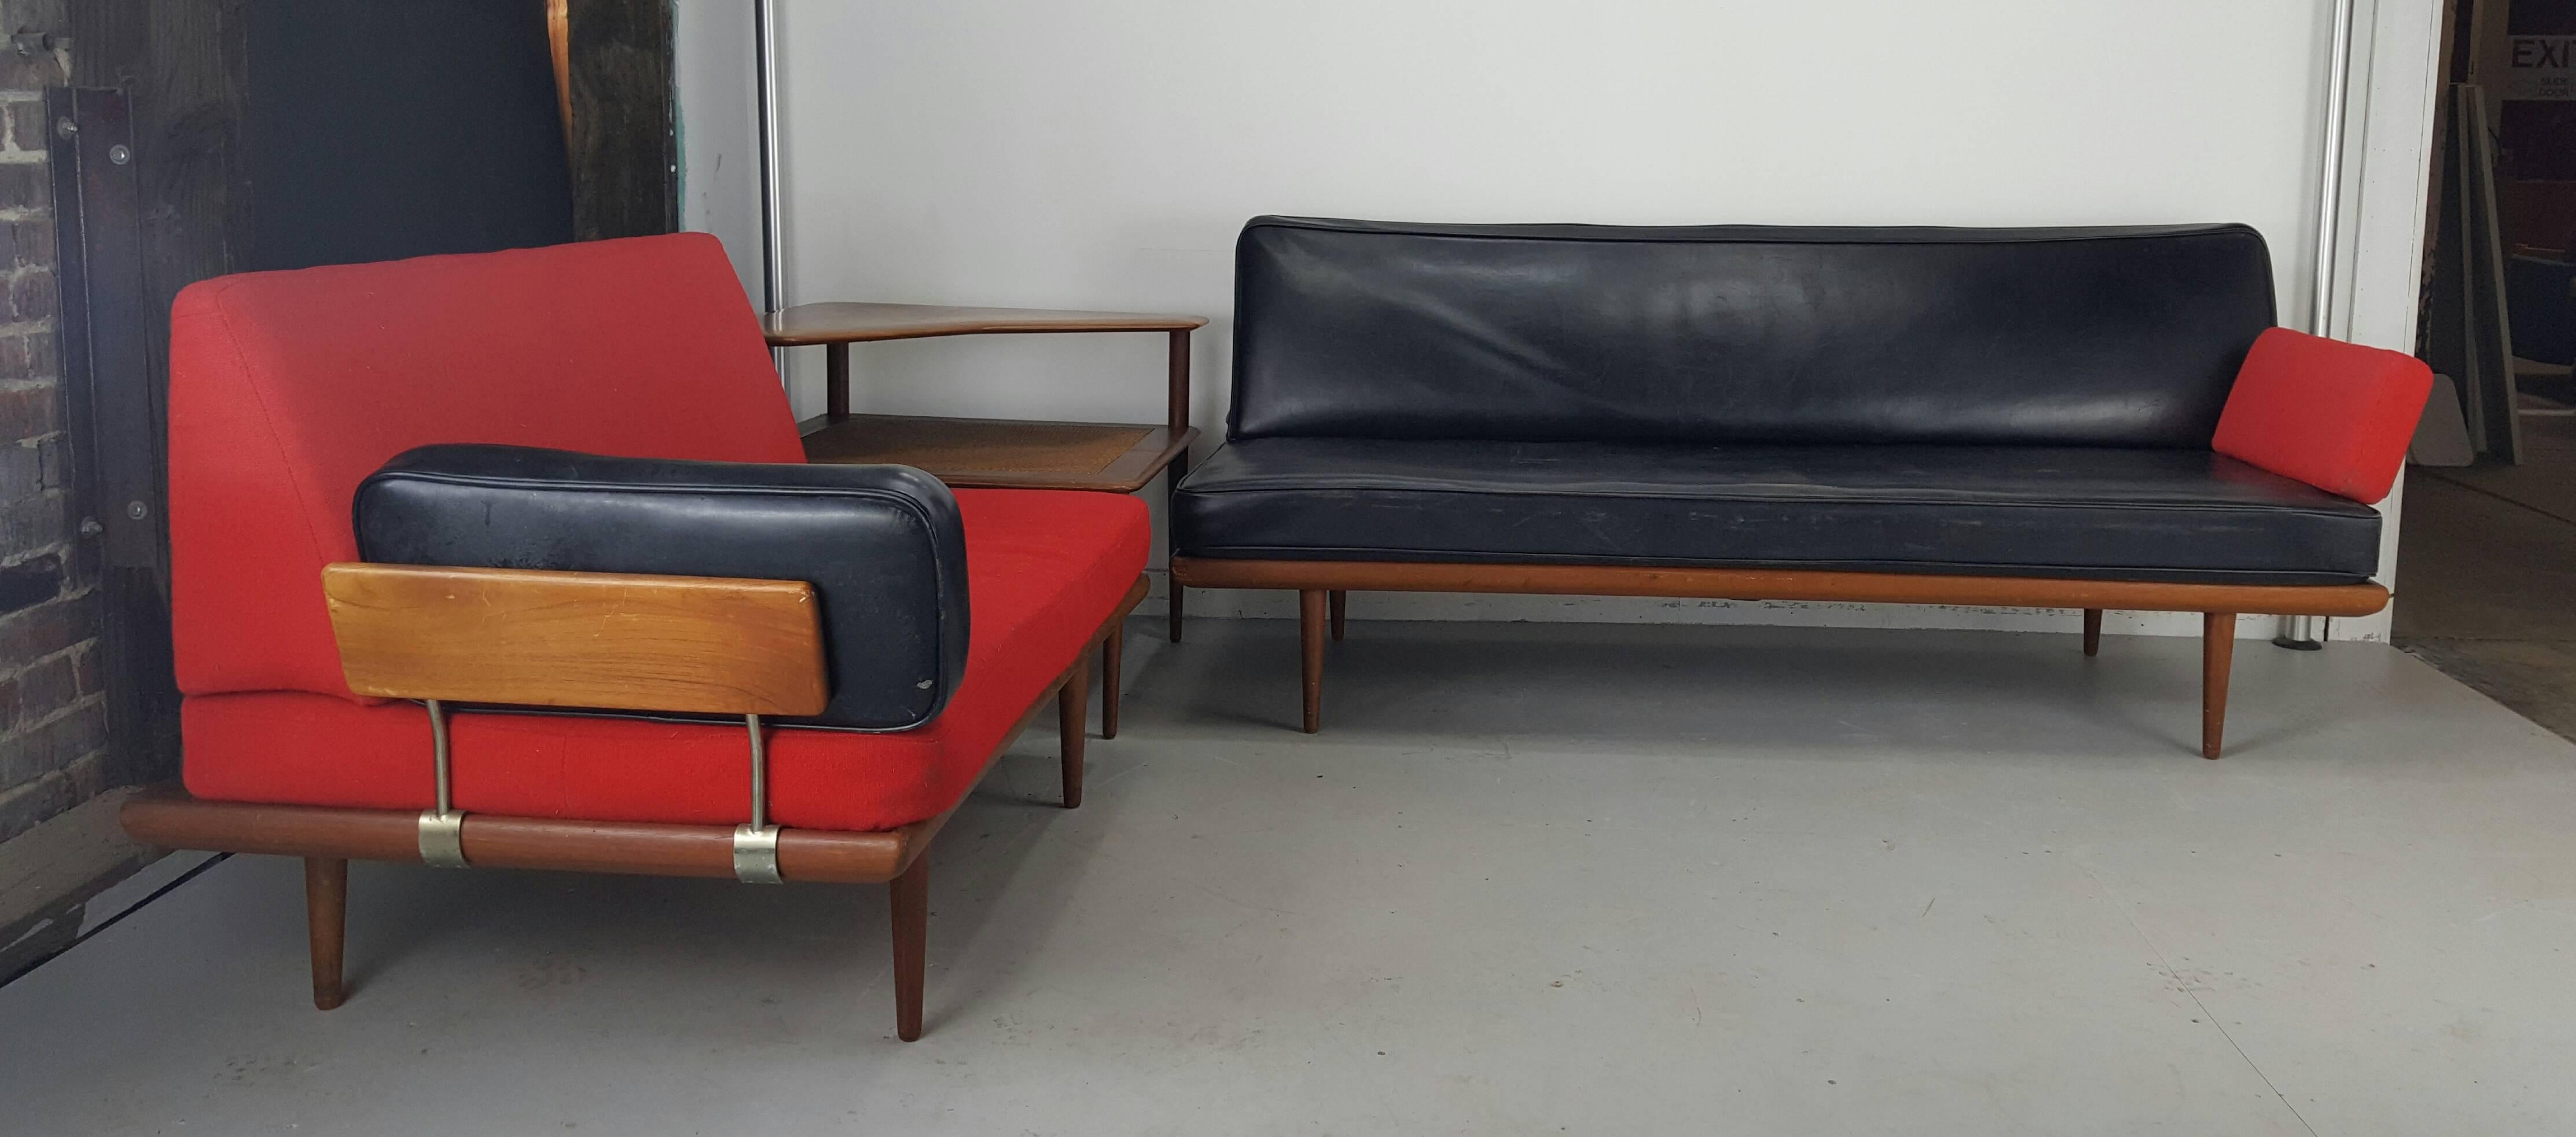 Minerva lounge sofas set designed by Peter Hvidt & Orla Mølgaard-Nielsen with two teak daybeds and a caned corner table.

Produced by France & Son in the 1960s, Denmark.

Three-seat retains original black vinyl two-seat red wool fabric, minor